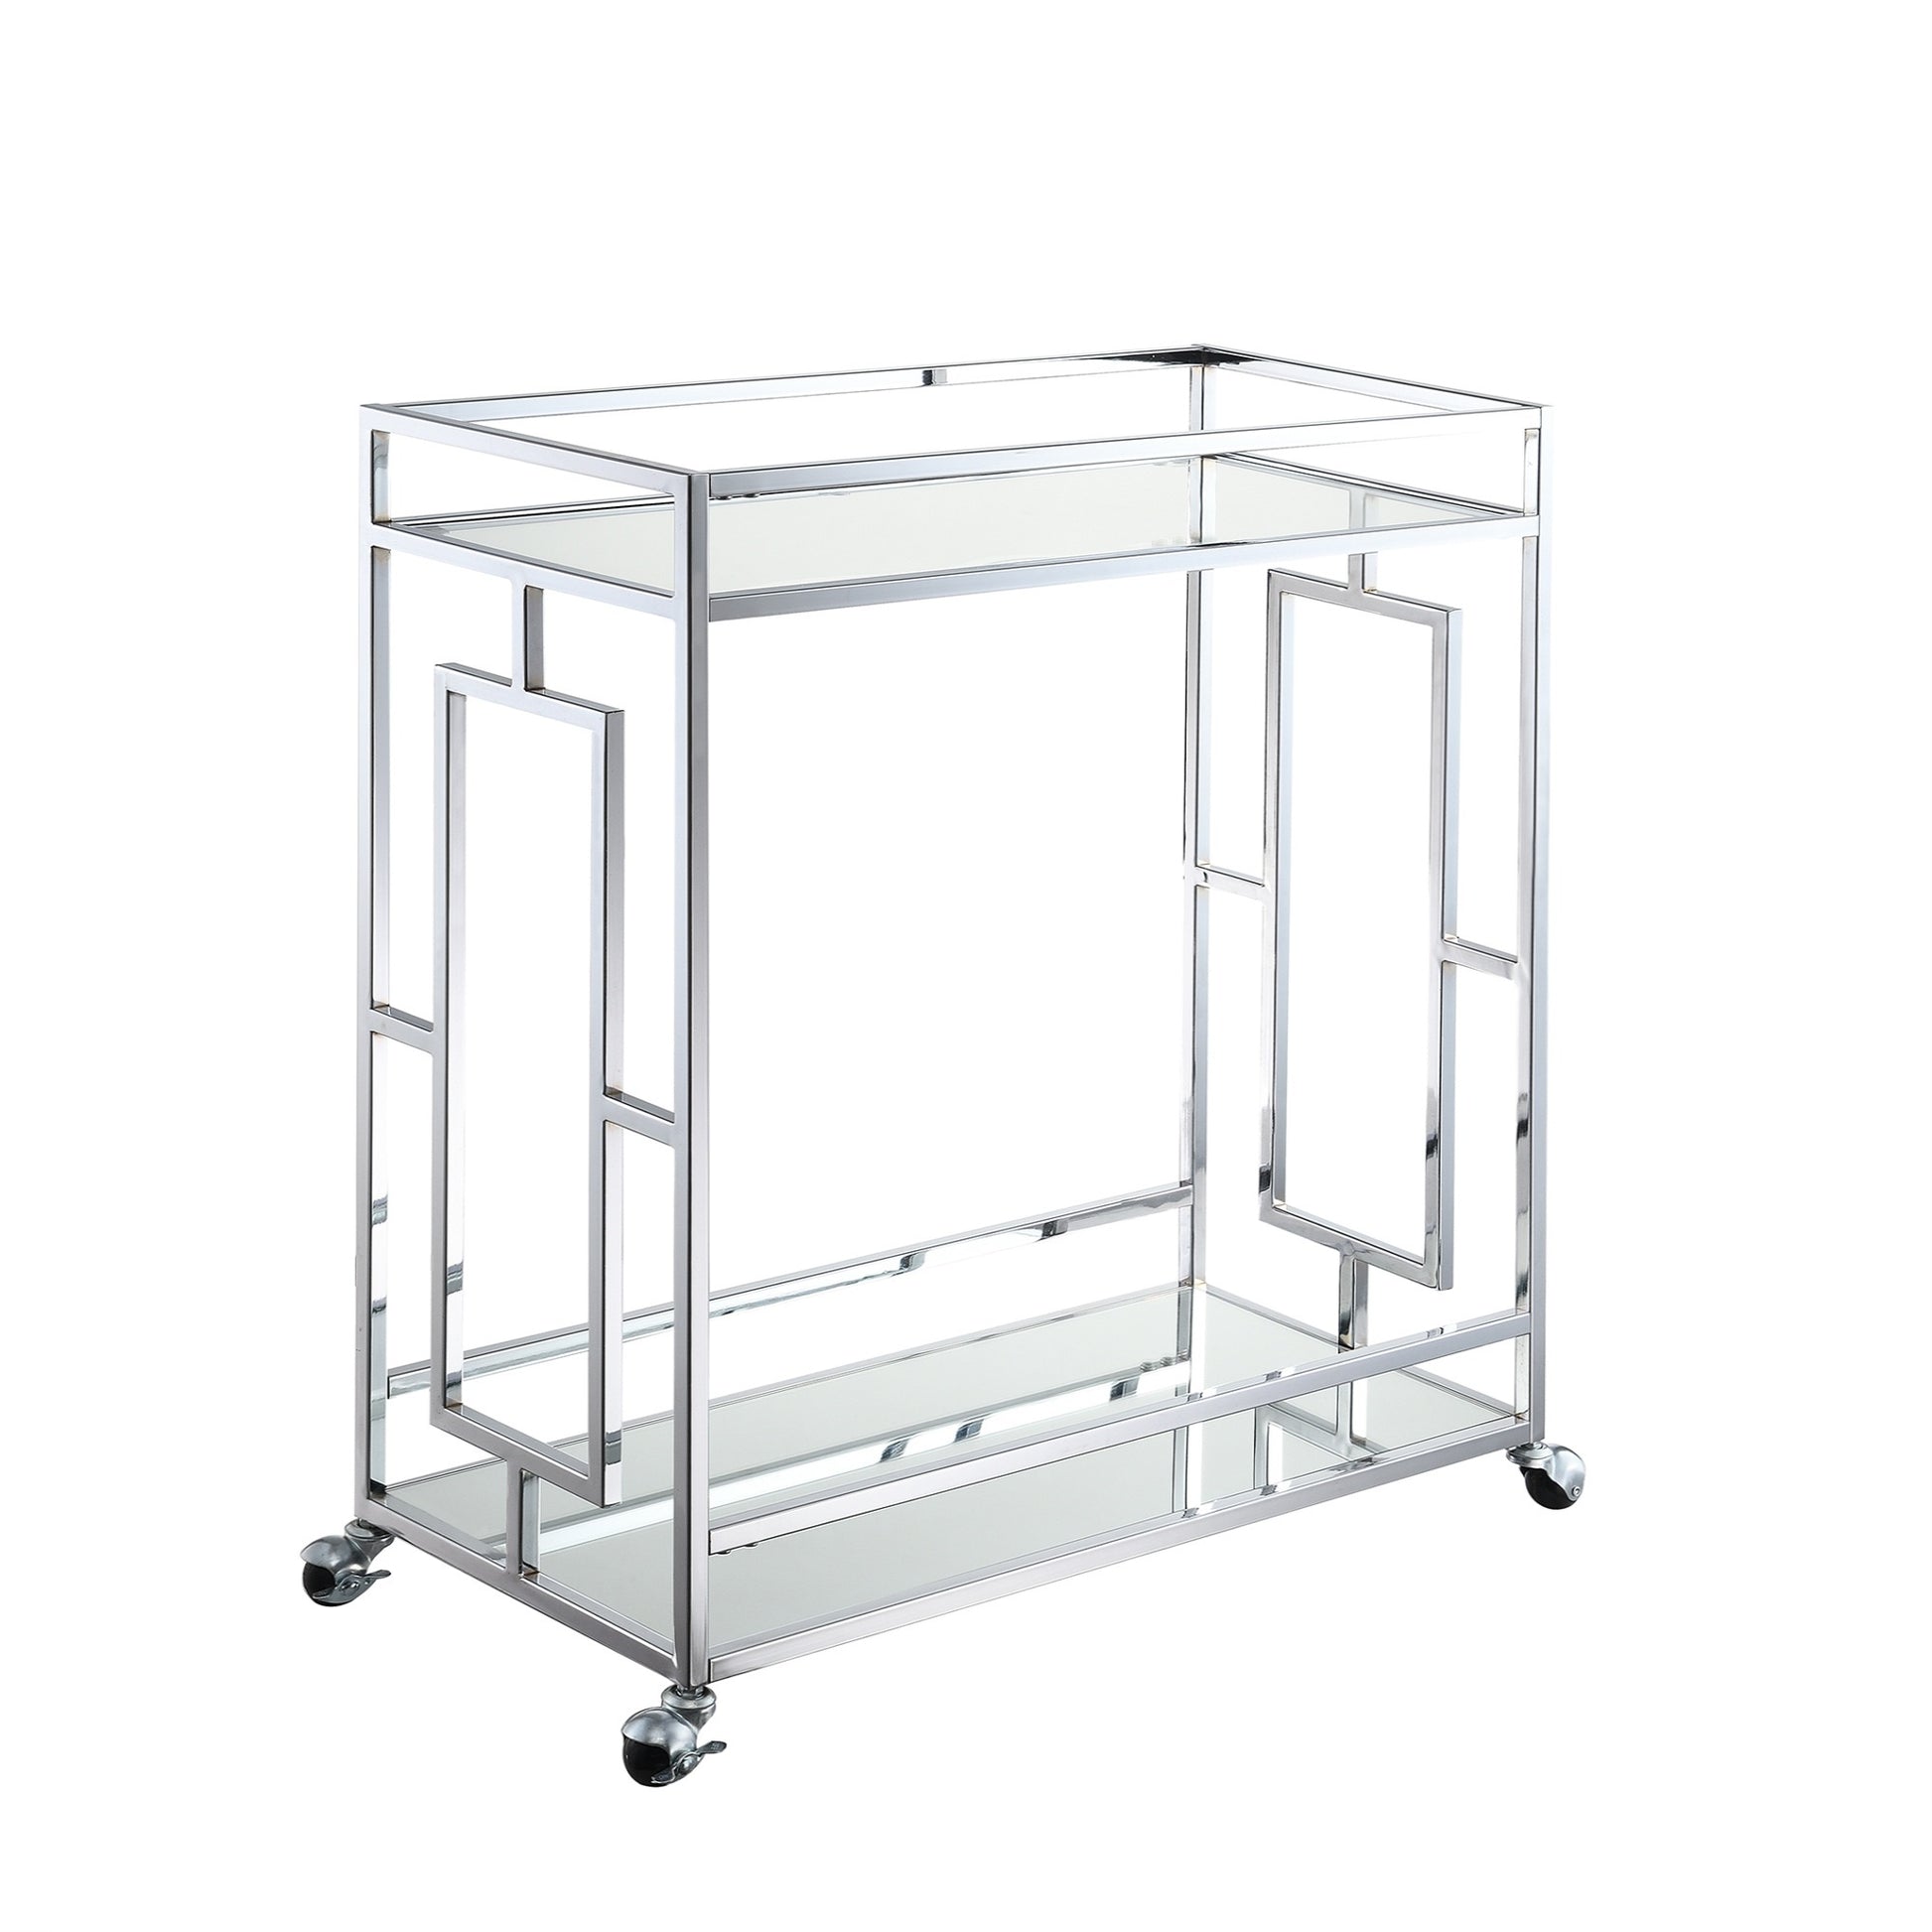 CasaFoyer Town Square 2 Tier Bar Cart - Glamorous Style, Clear Glass & Mirrored Shelves, Portable with Lockable Wheels, Chromed Metal Construction